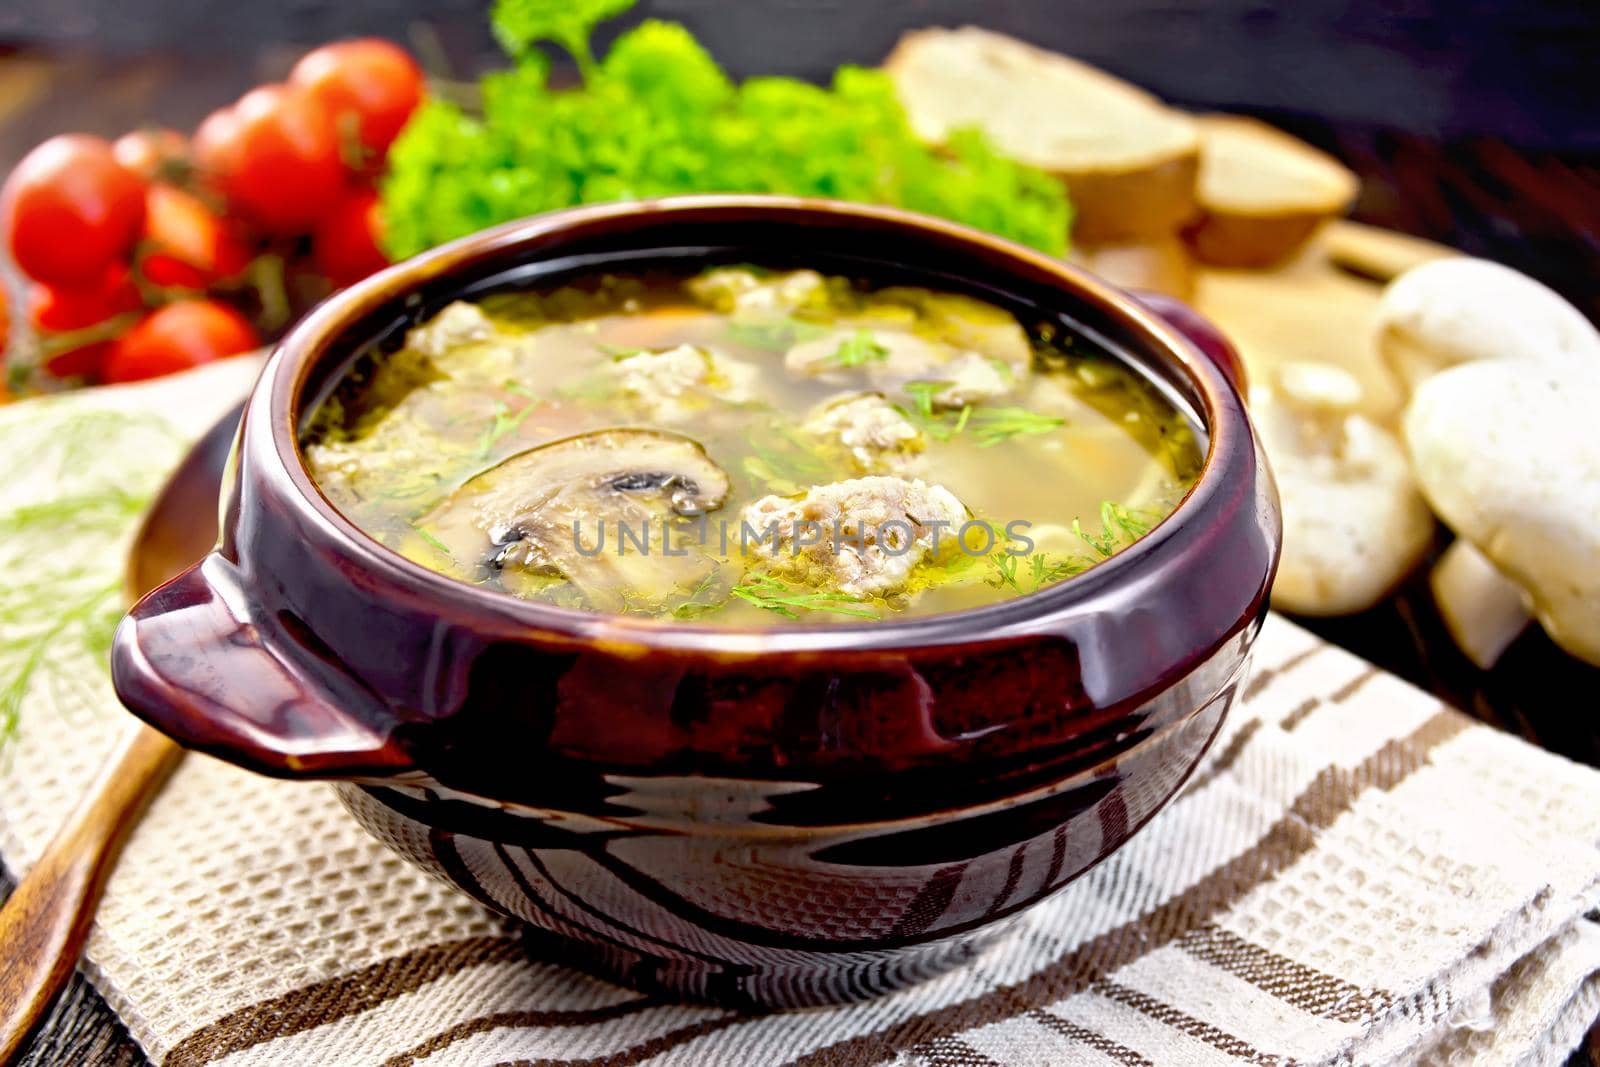 Soup with meatballs, noodles and champignon in a clay bowl, spoon on the towel, parsley, tomatoes, mushrooms and bread on a wooden boards background